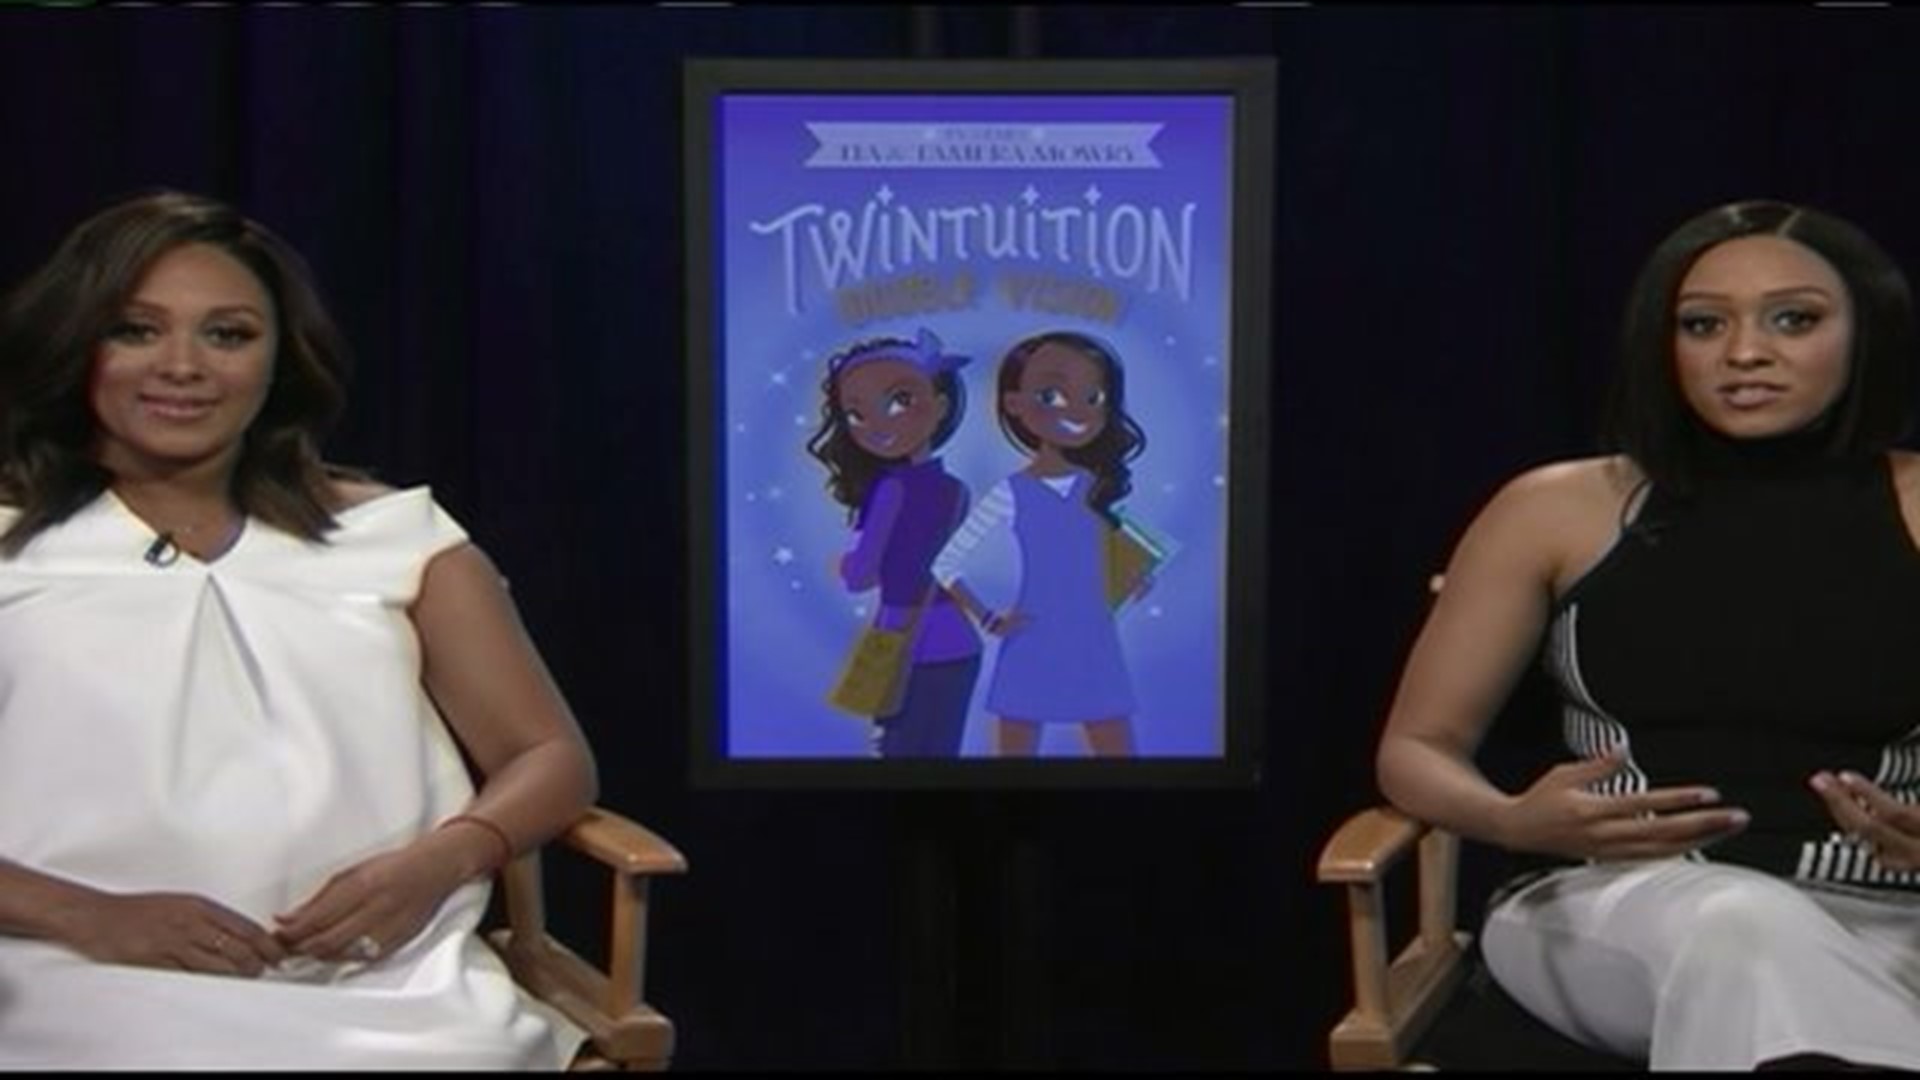 Actresses Tia & Tamera Mowry talk about their tween twin tale 'Twintuition'